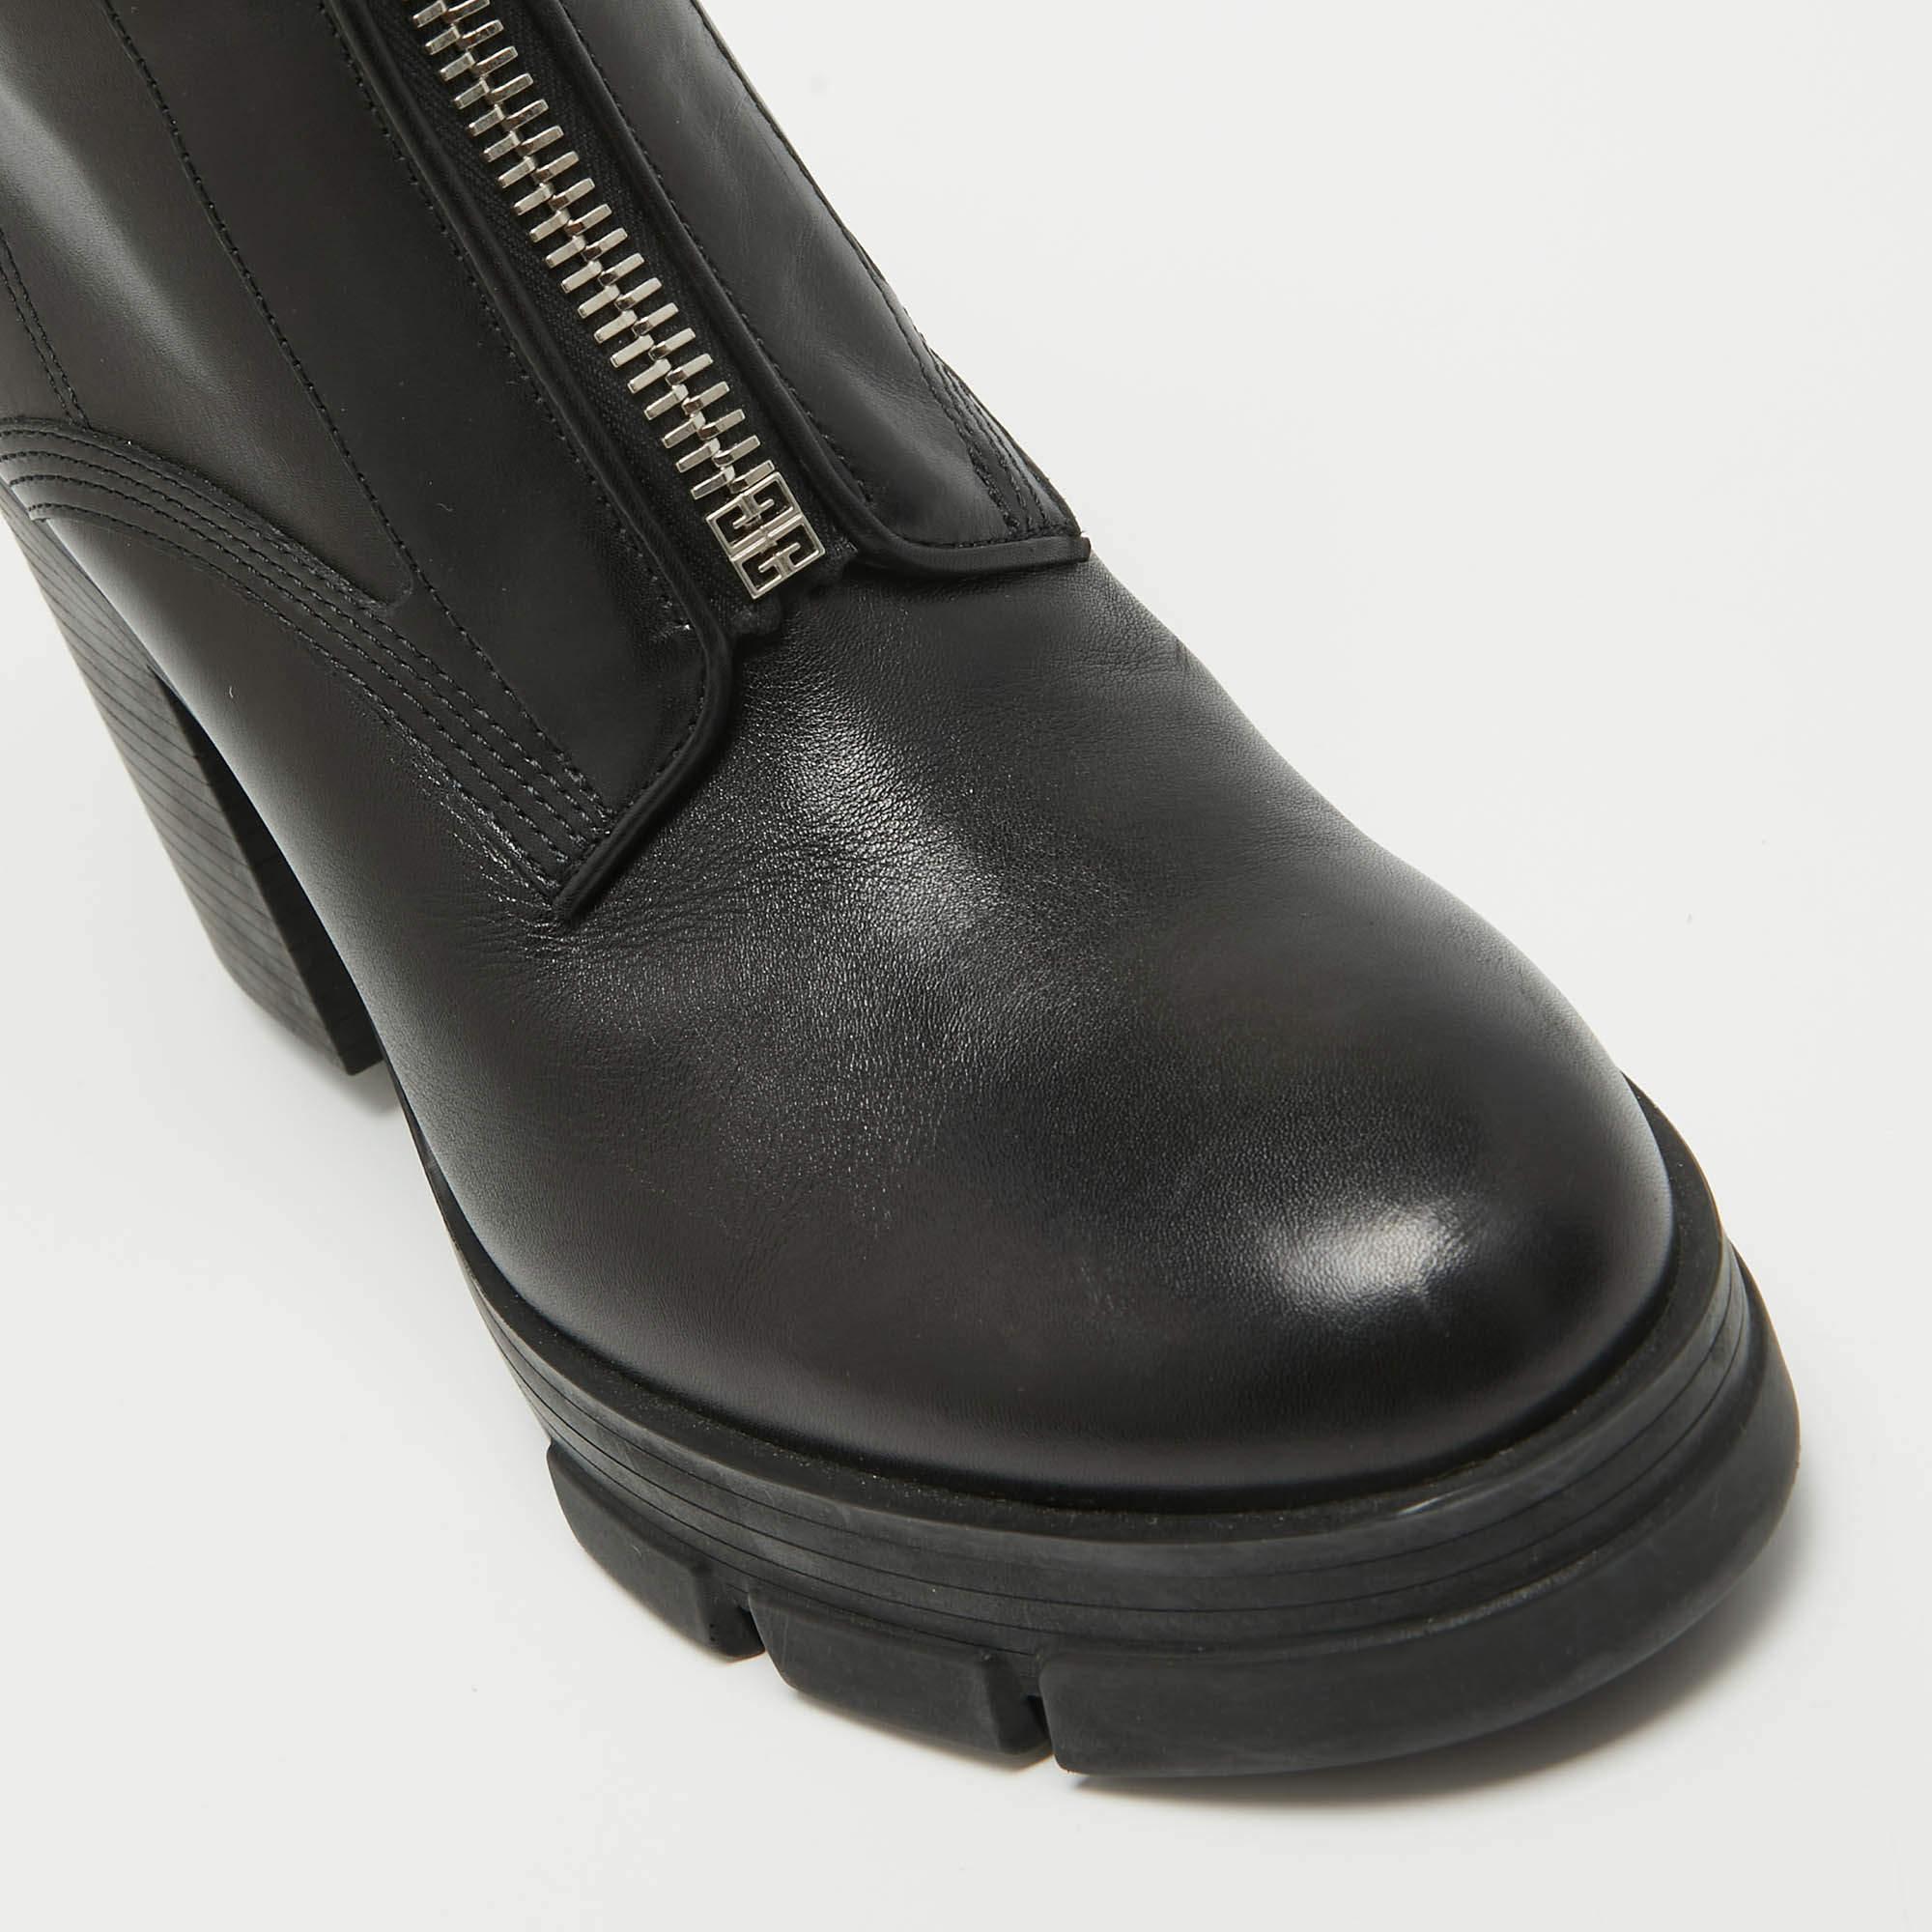 Givenchy Black Leather Ankle Boots Size 40 1